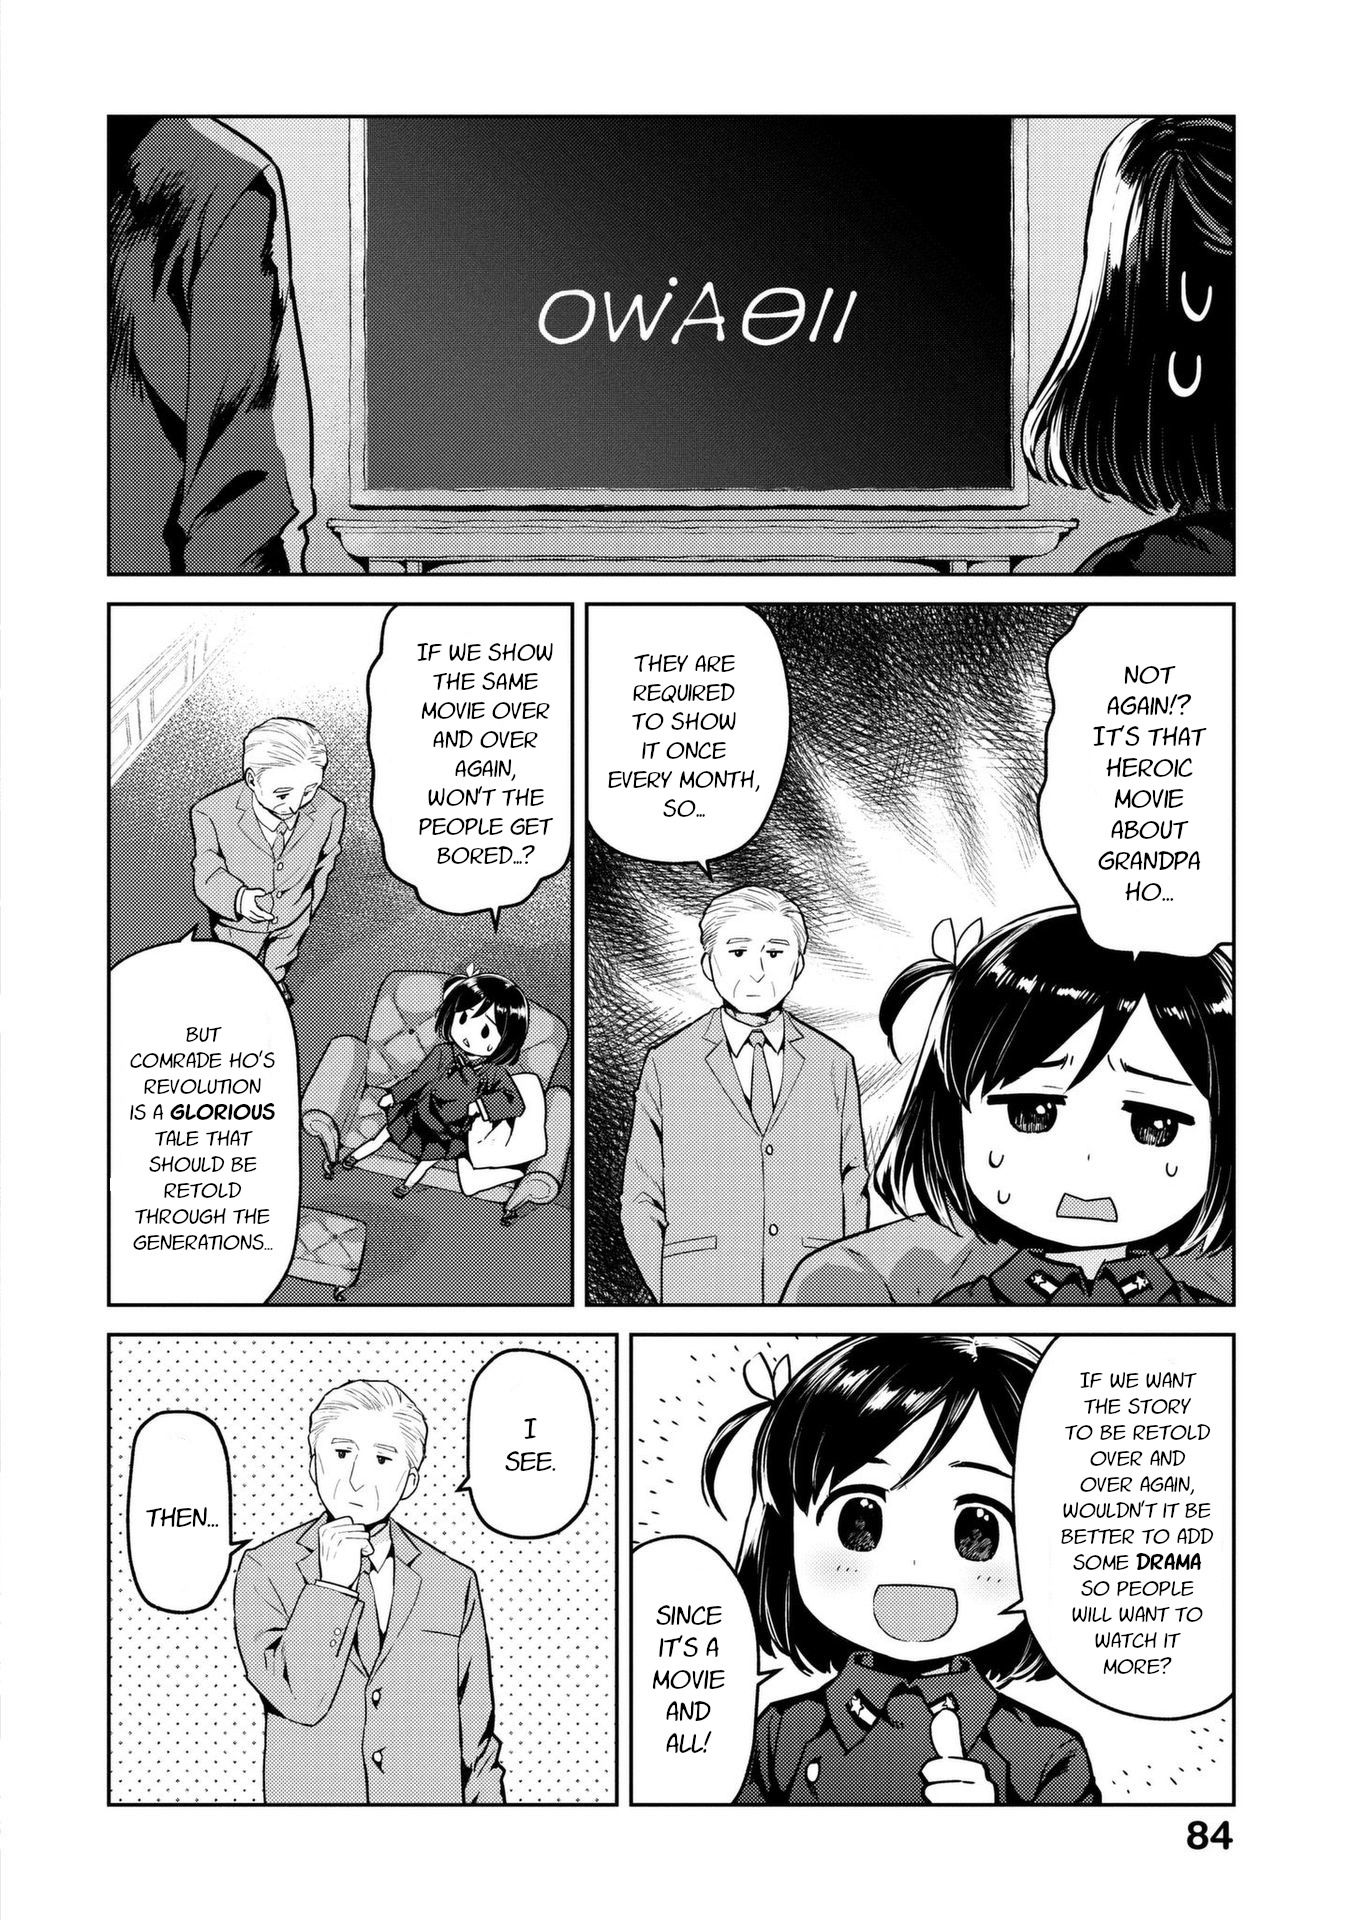 Oh, Our General Myao. vol.1 ch.9